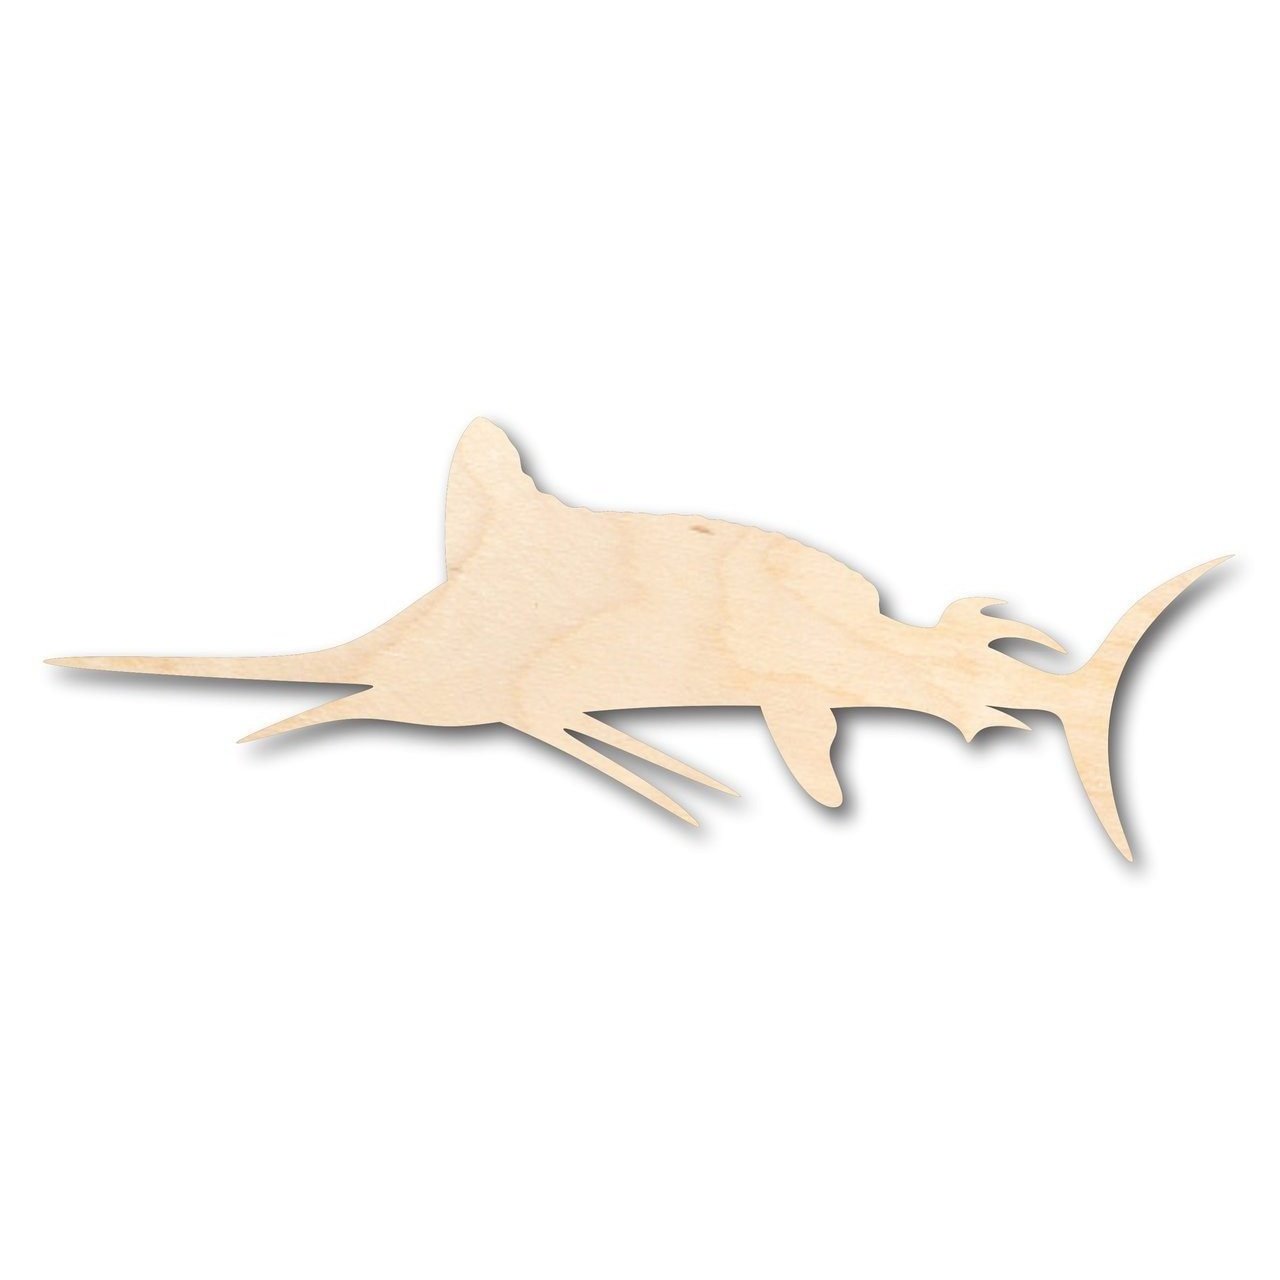 Unfinished Wooden Marlin Shape - Swordfish - Ocean - Fishing - Craft - up to 24